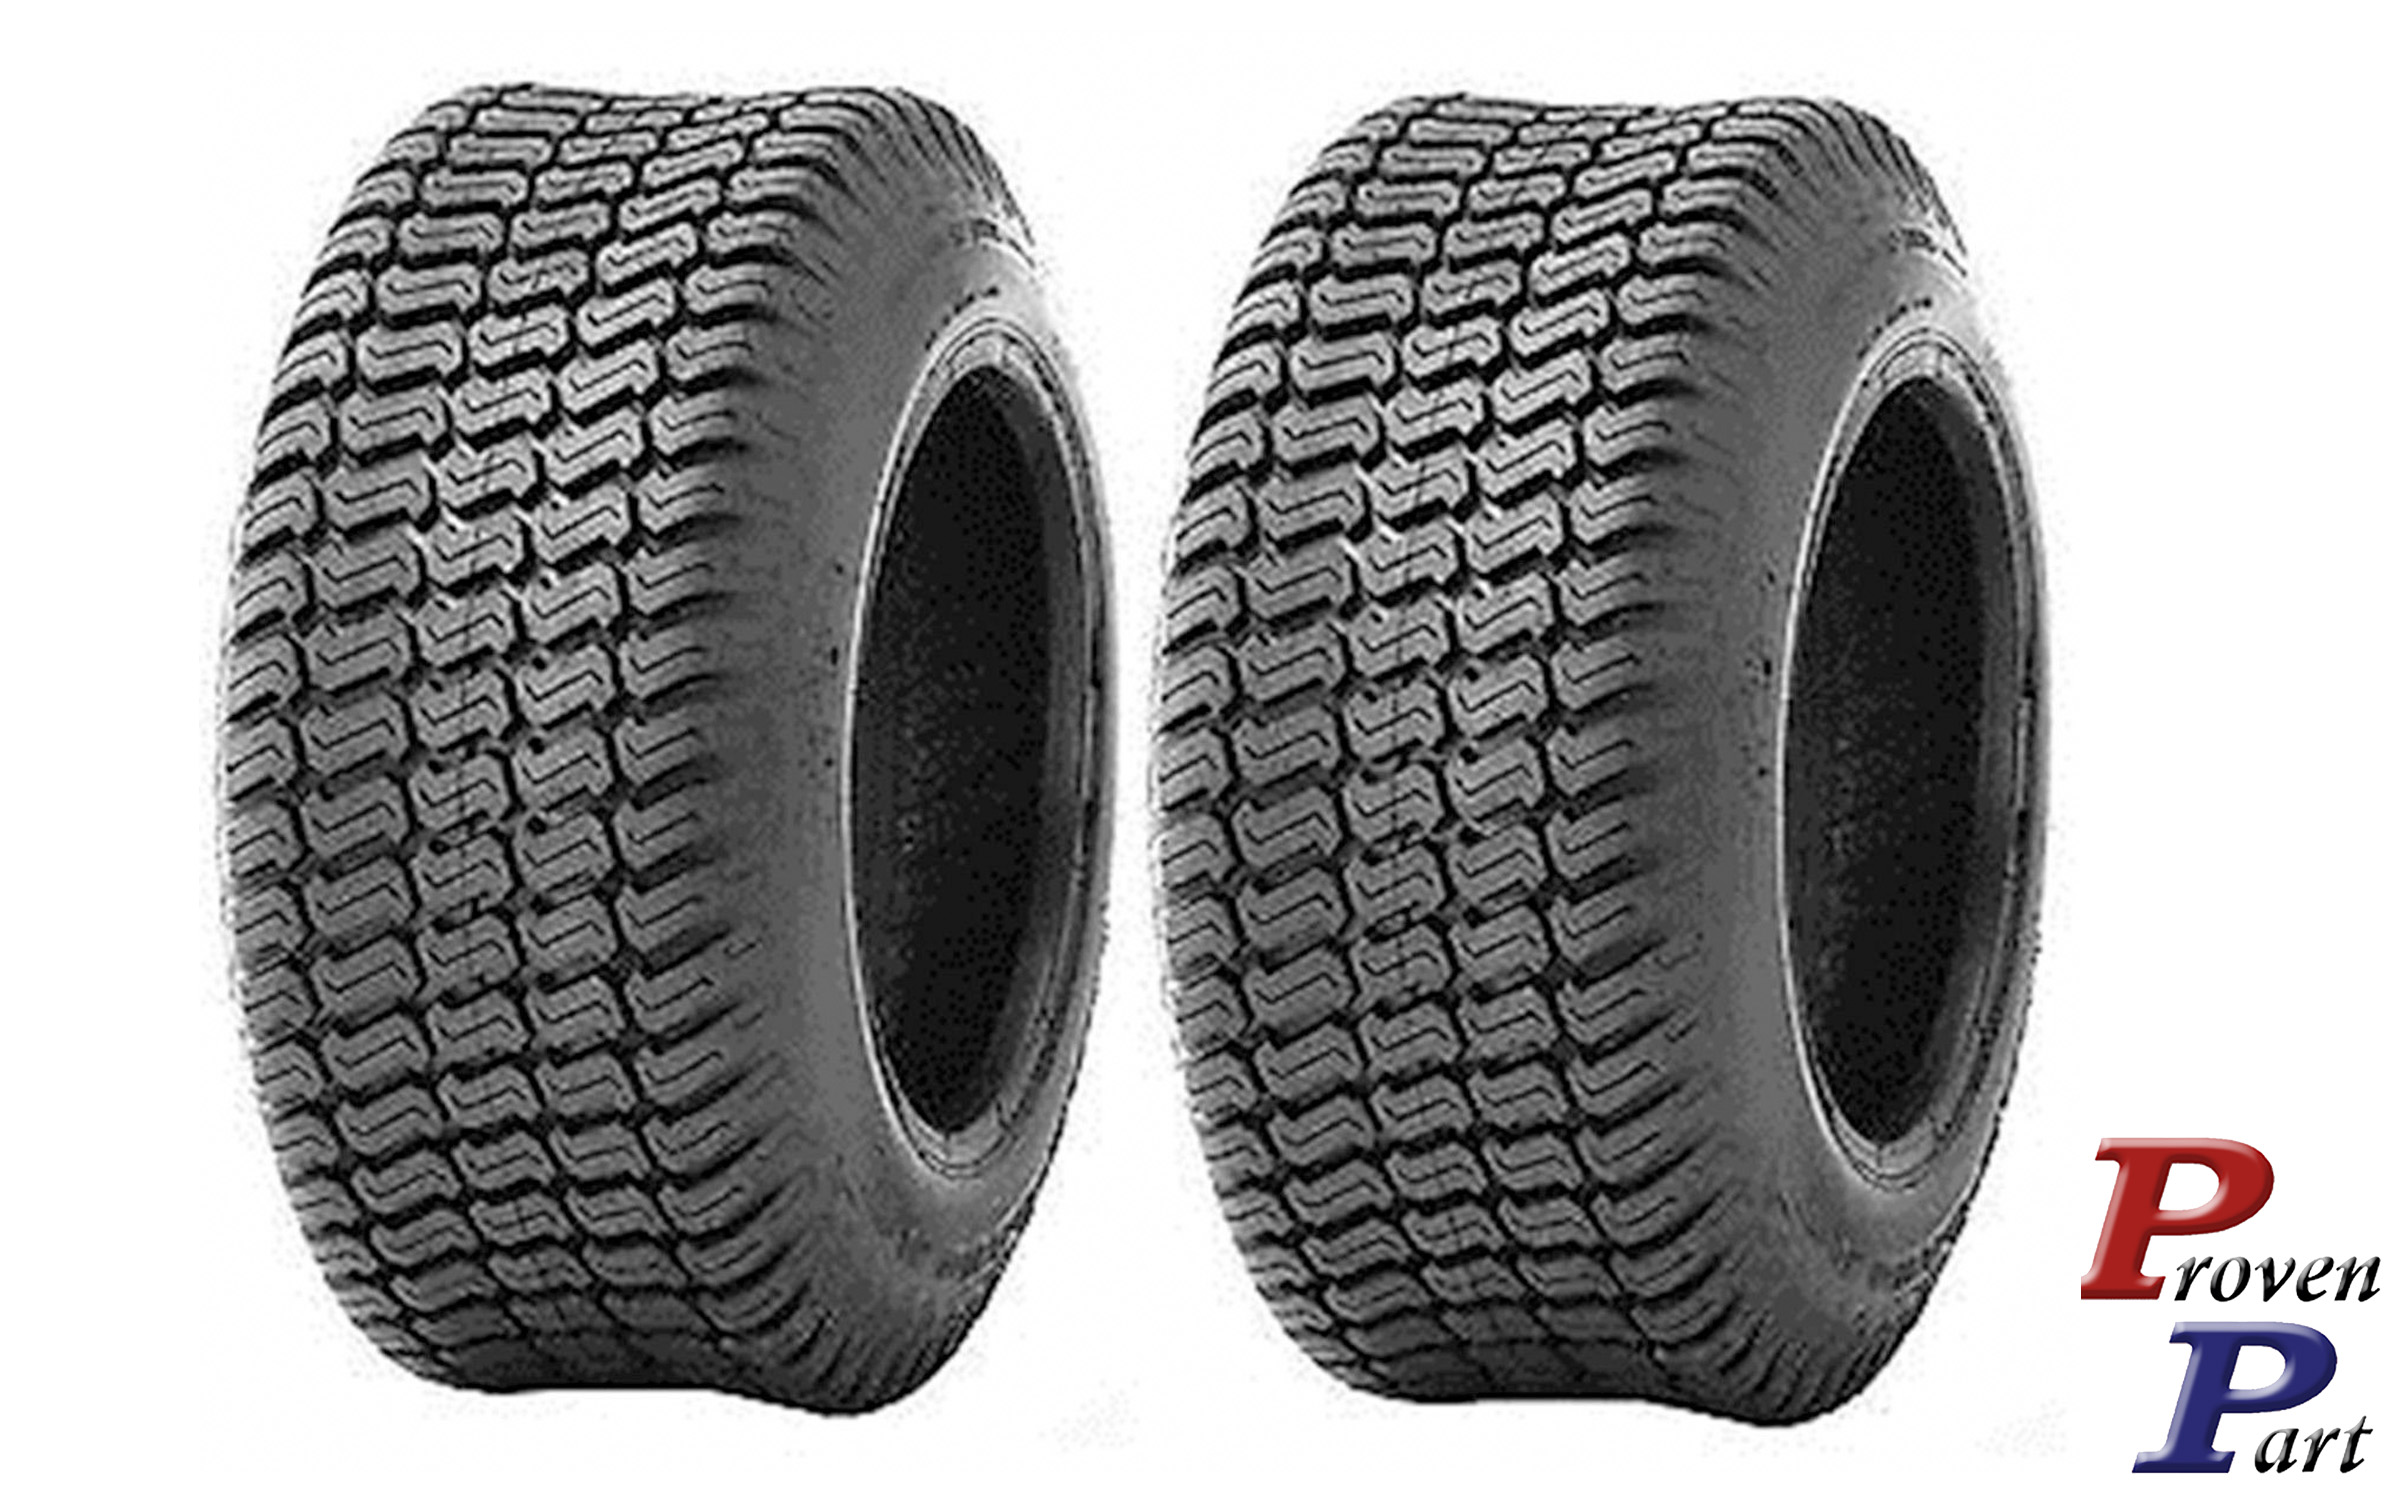 Set of 2 lawn mower tires PROMASTER 18X8.50-8 505 tubeless 4 Ply